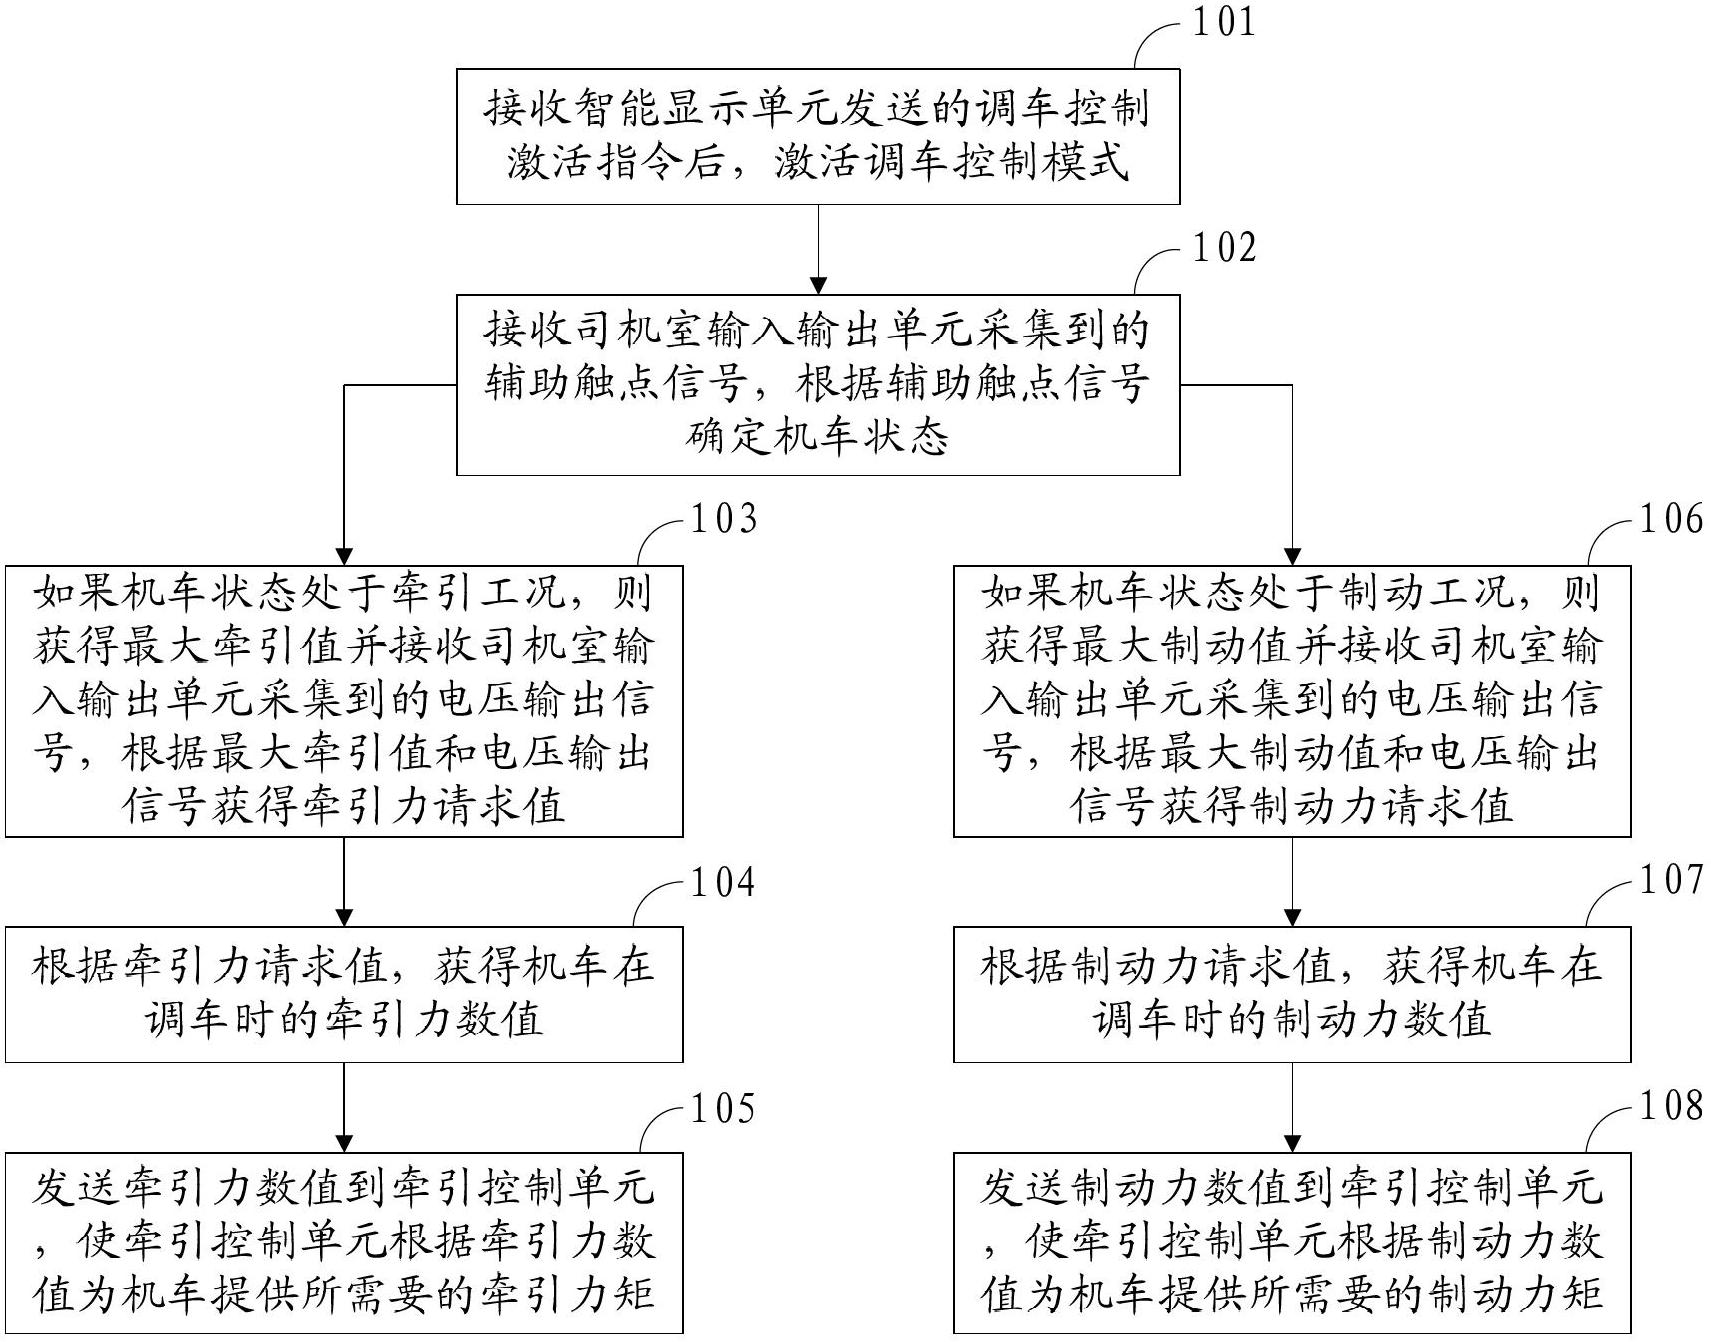 Electric locomotive shunting control method, device and system